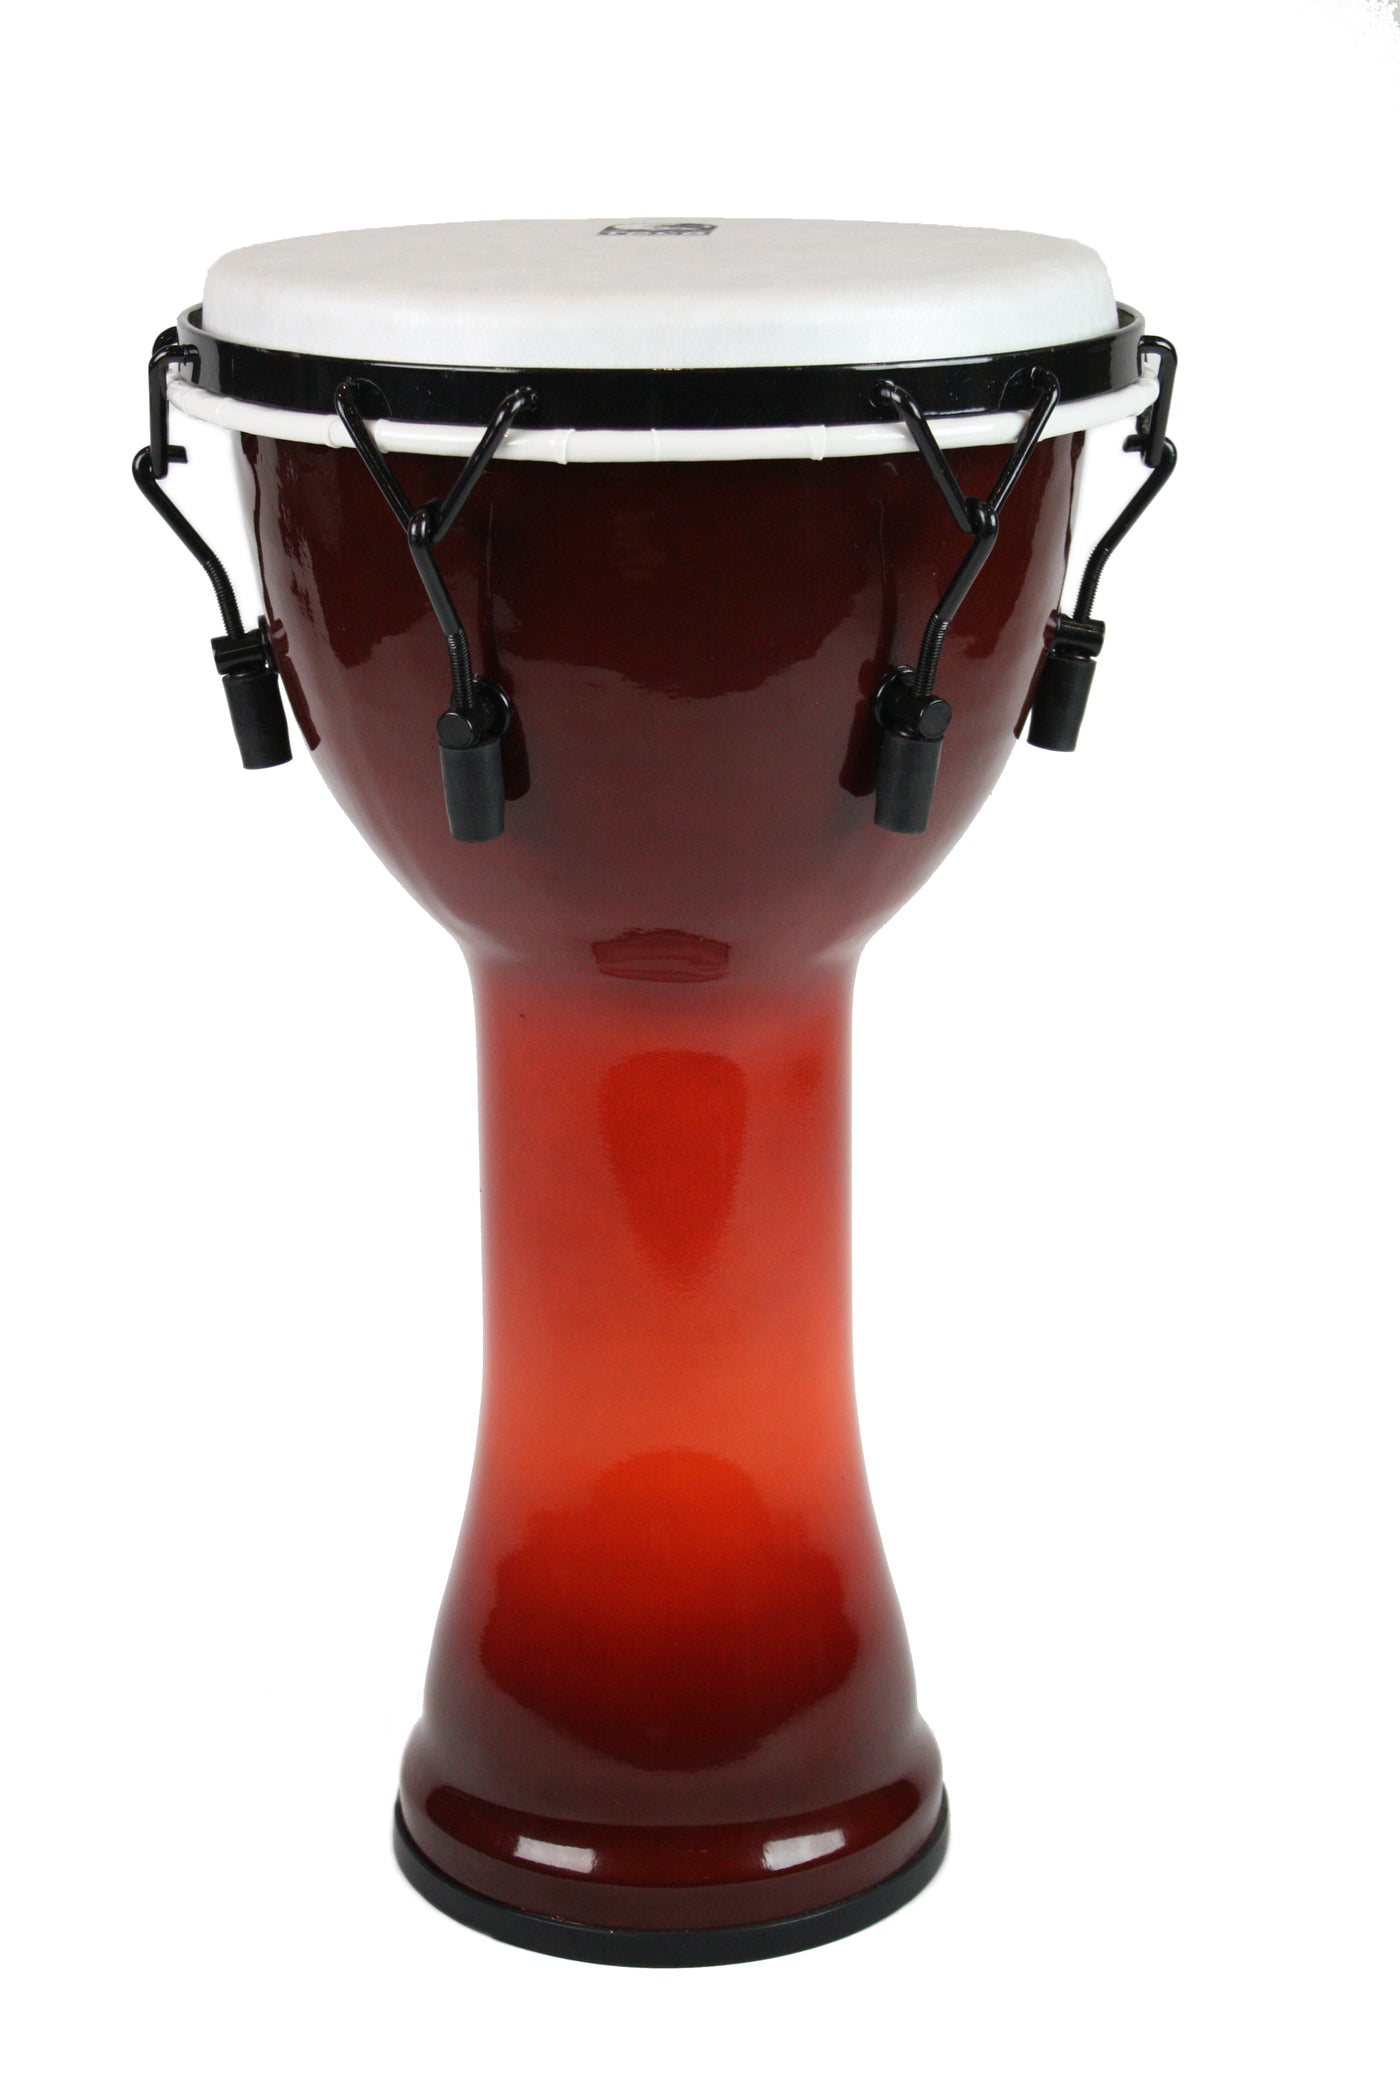 NEW Toca Freestyle Mechanically Tuned Djembe - African Sunset